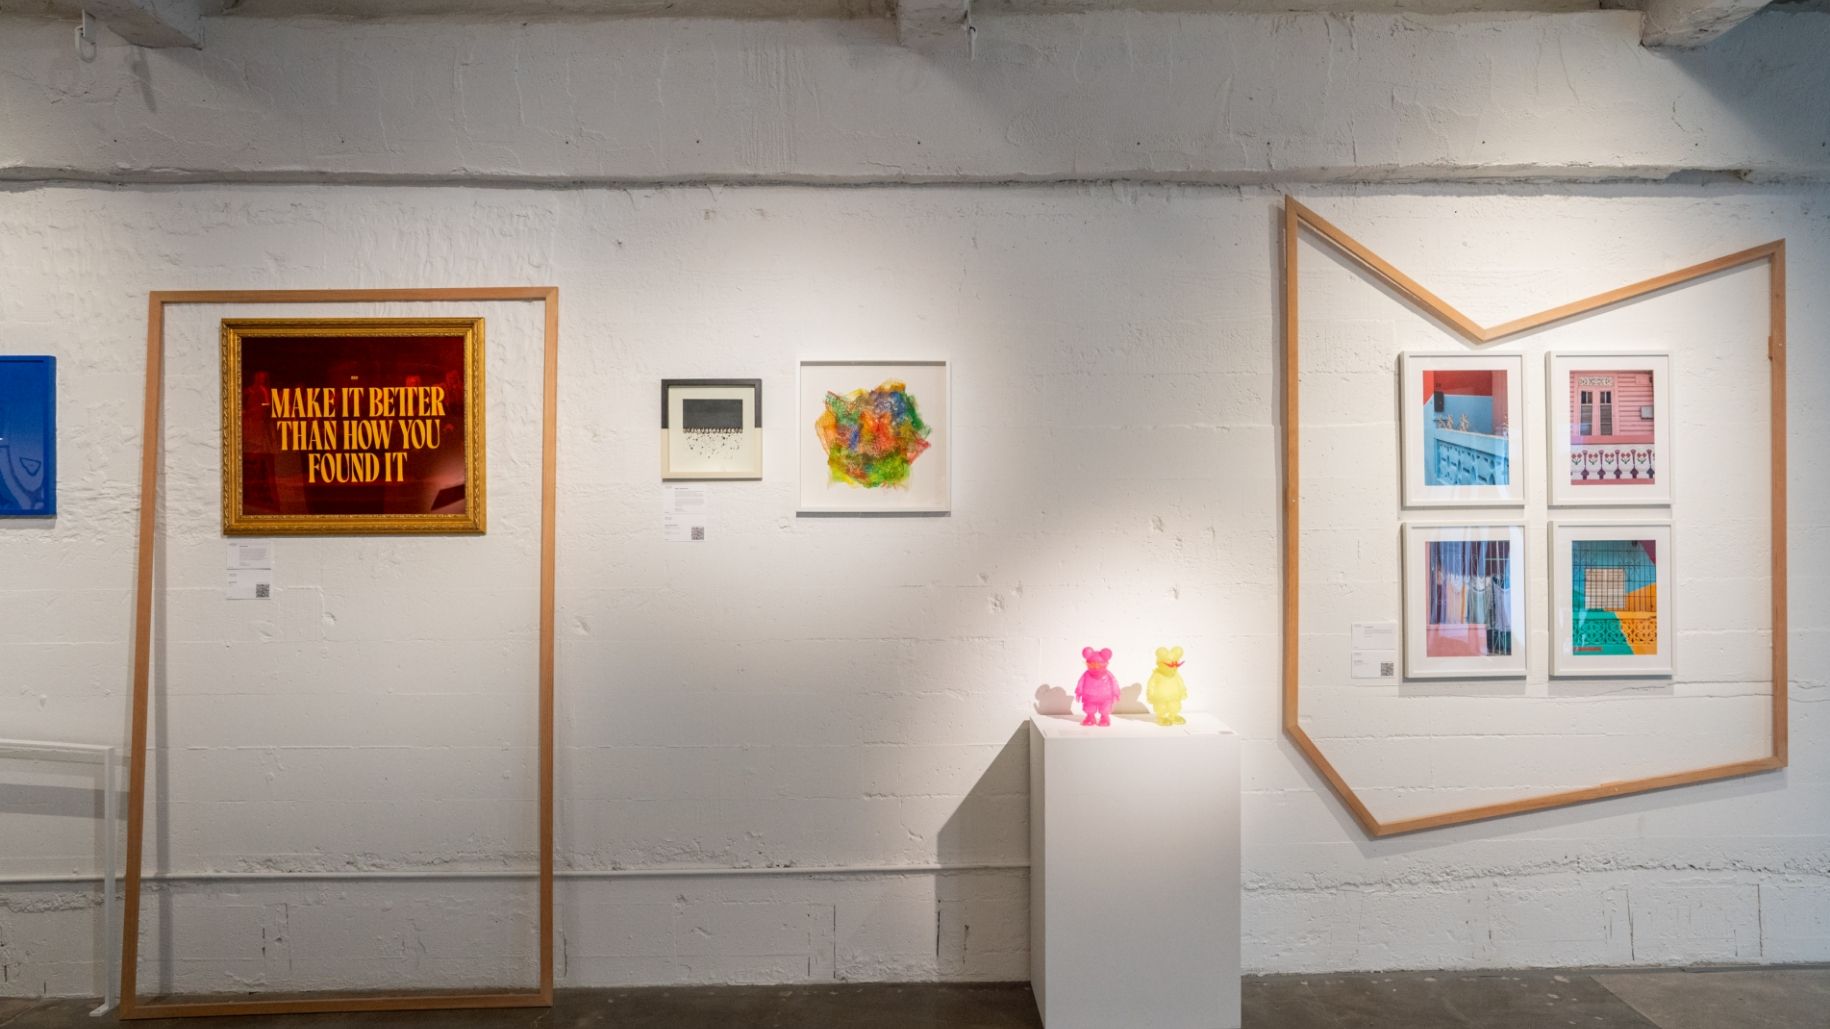 A group of framed artworks on display in an art gallery.